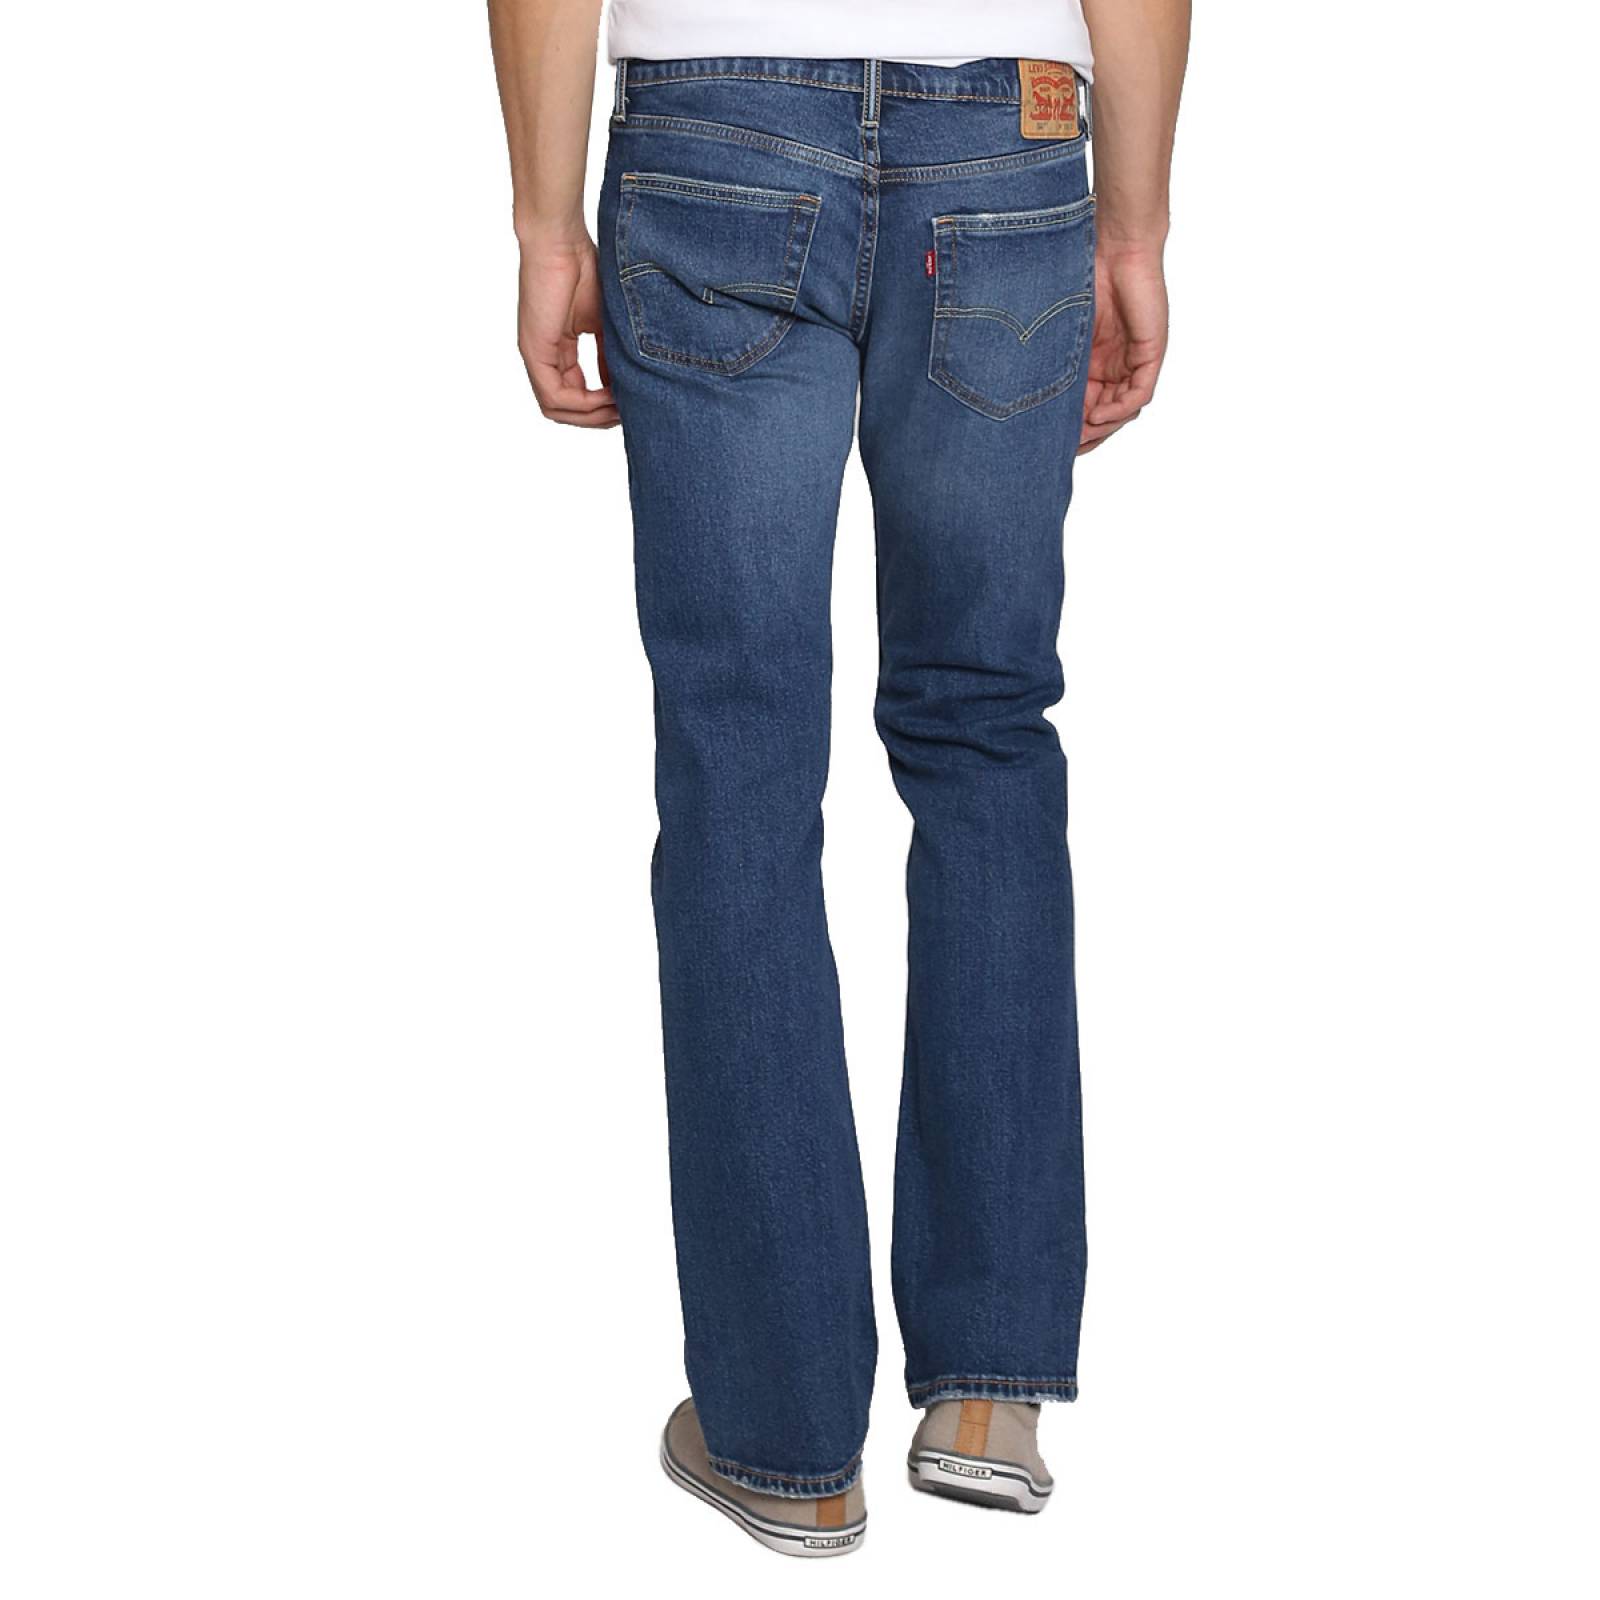 Jeans Azules by Levis